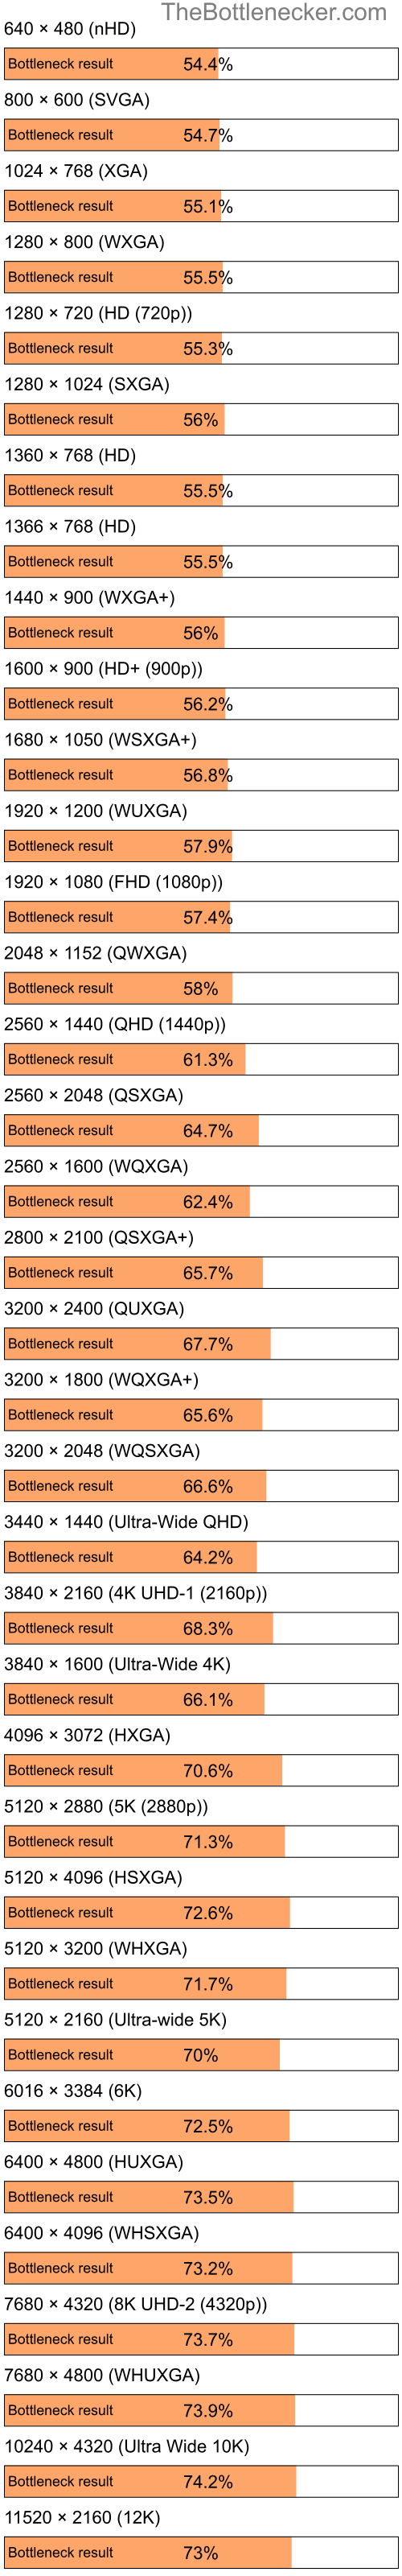 Bottleneck results by resolution for Intel Pentium 4 and NVIDIA GeForce 9400M in Processor Intense Tasks